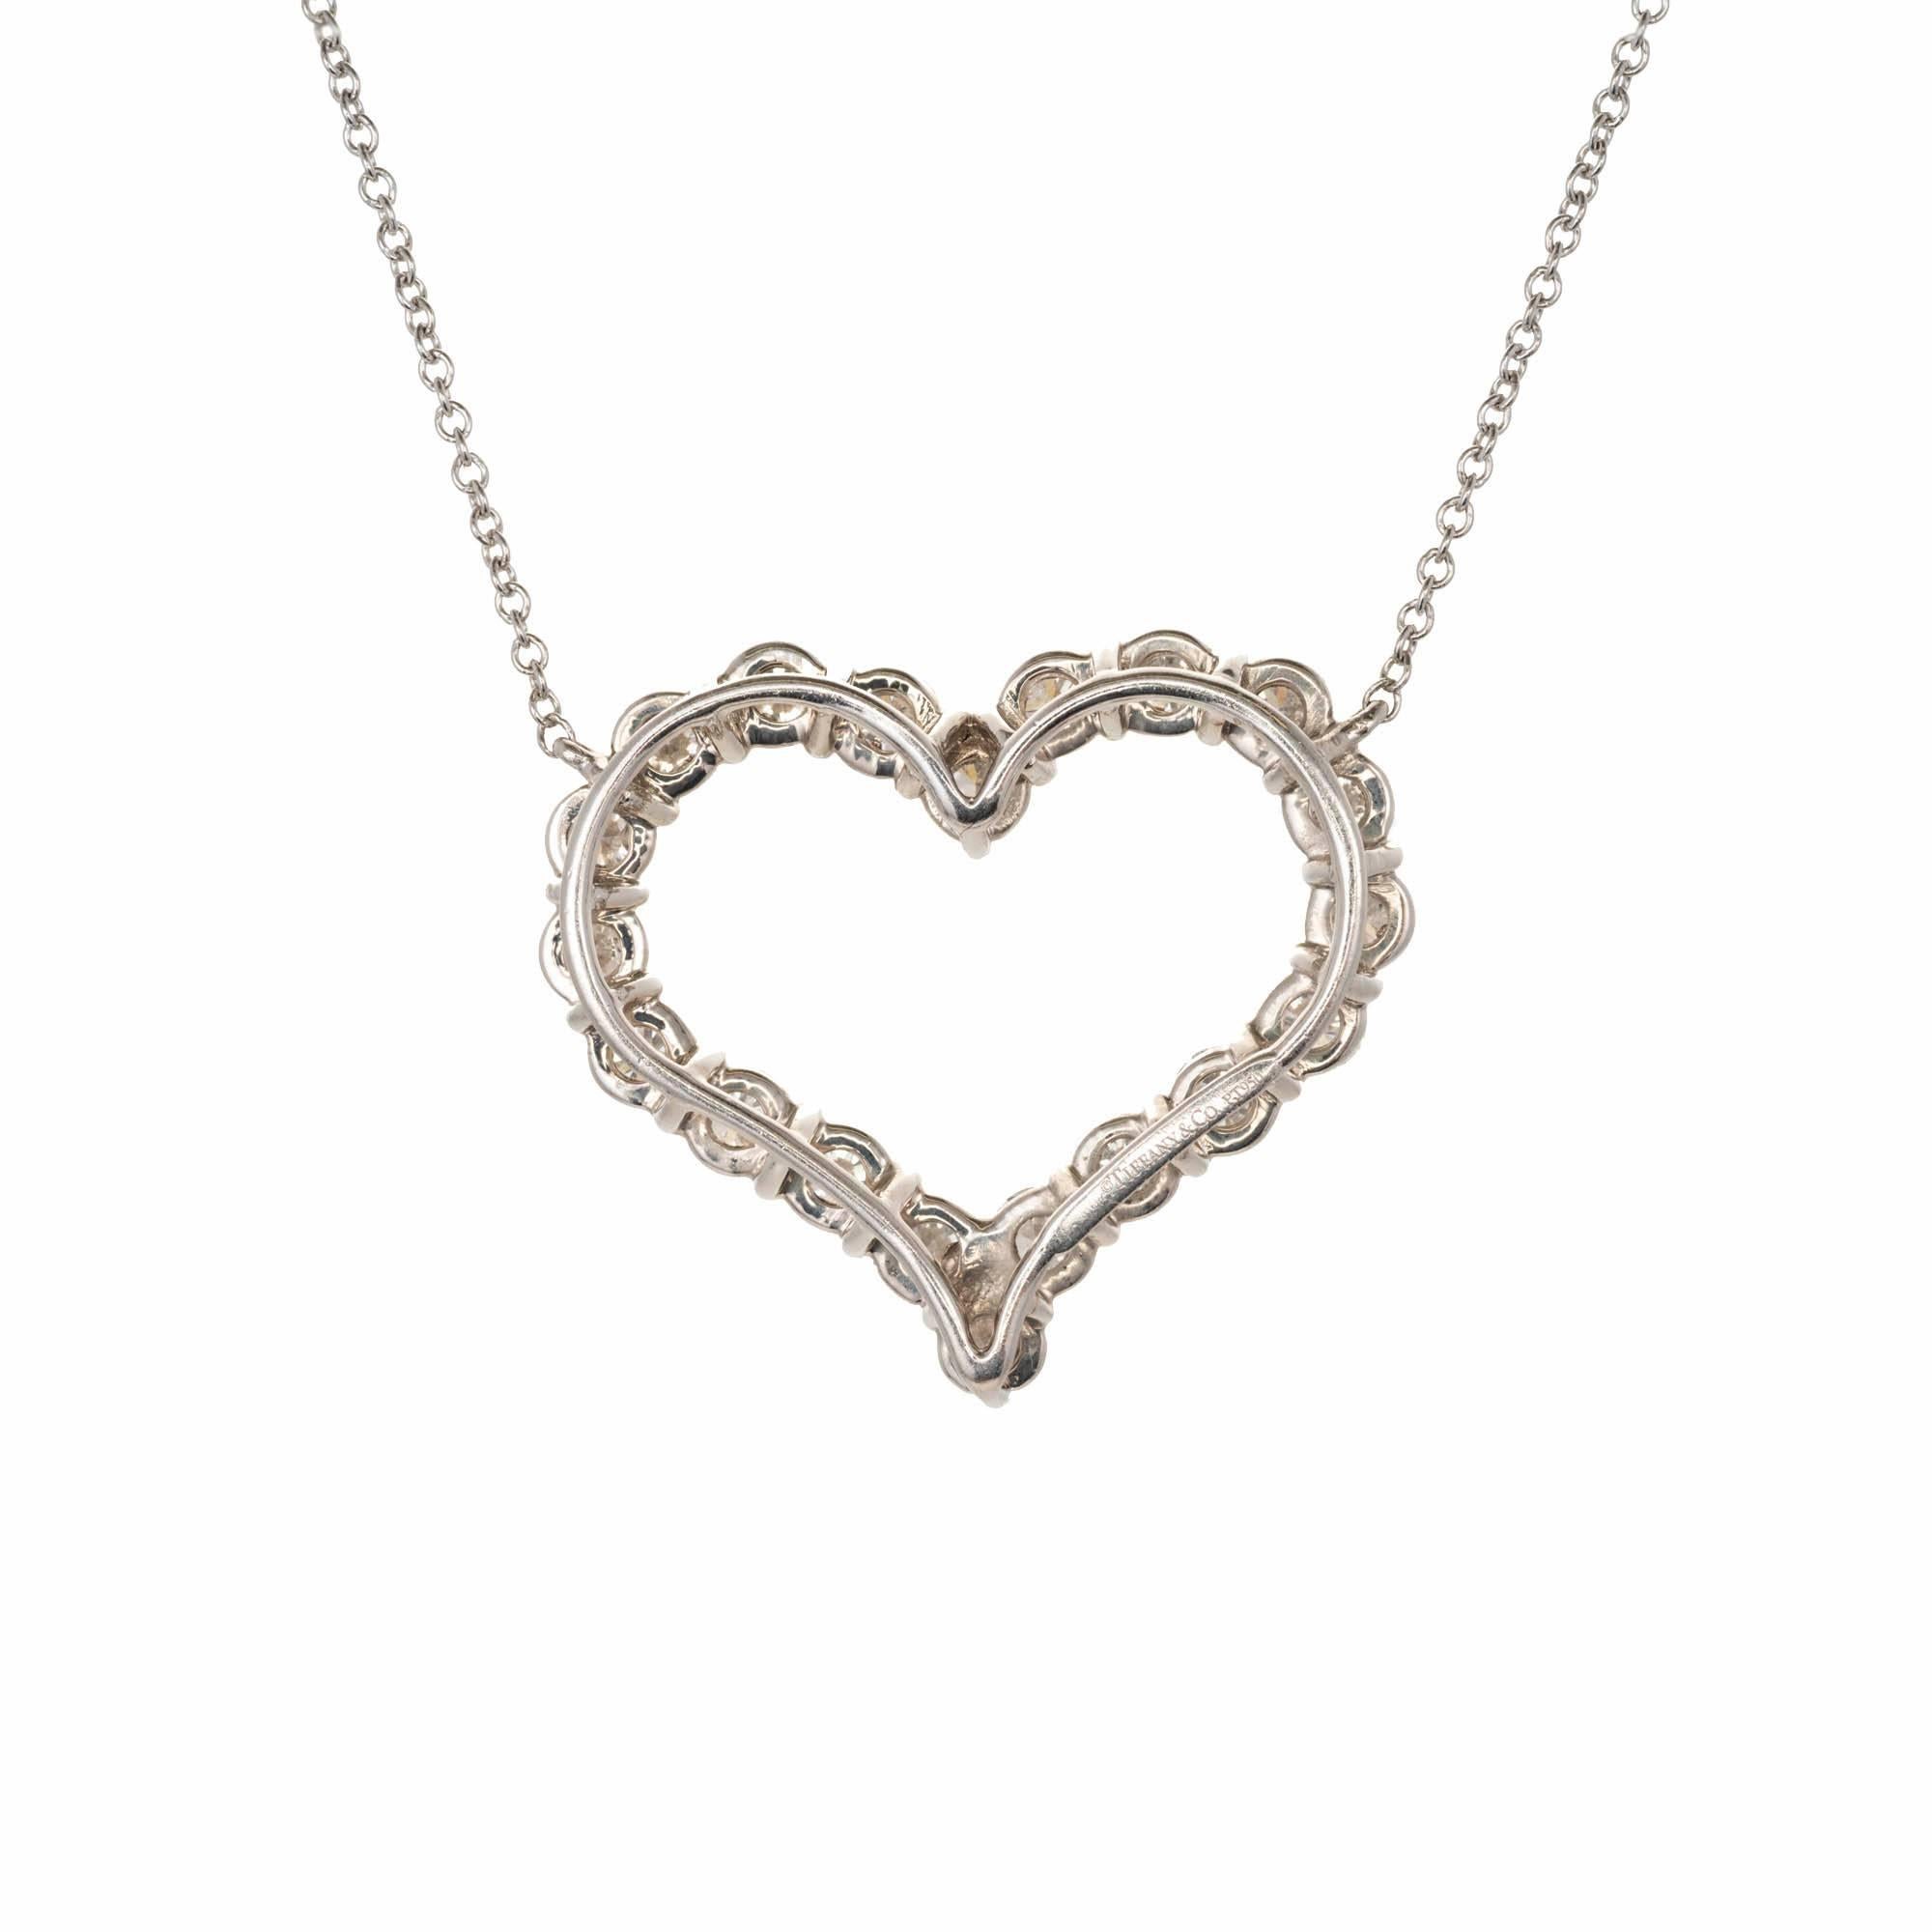 Tiffany & Co diamond heart pendant necklace. Large size with 20 brilliant cut diamonds 1.96 carats in platinum on a 16 inch chain. Both the heart and the chain are signed.

20 round diamonds ideal cut F VS approximate 1.96 carats
Platinum
Tested: